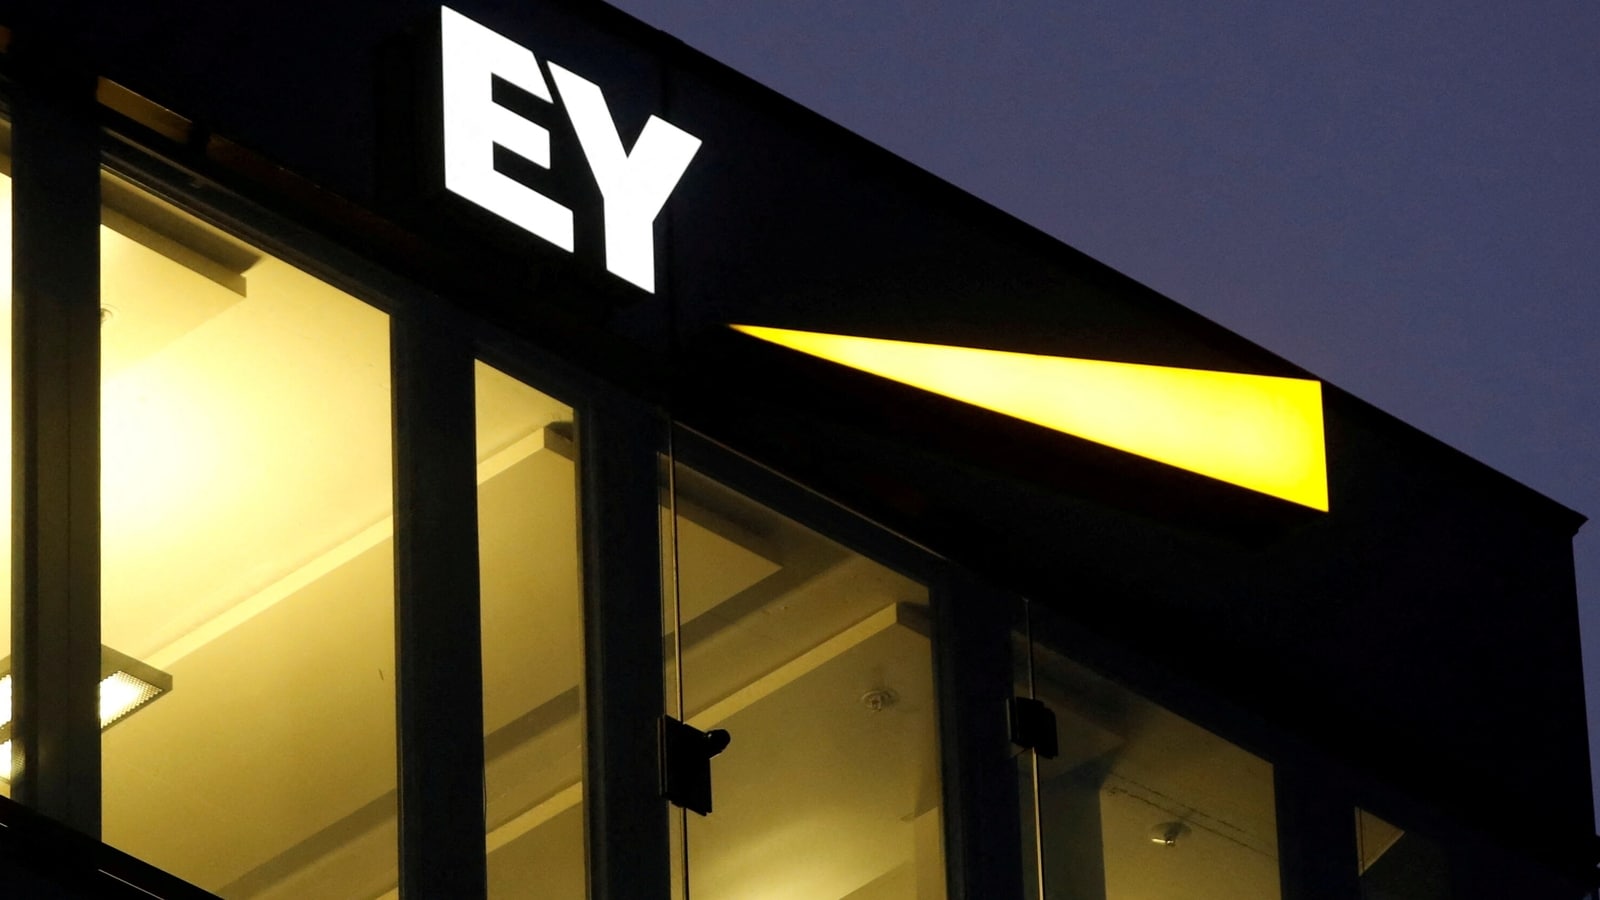 Ernst & Young evaluating worldwide audit business split in big  shake-up: Reports - Hindustan Times